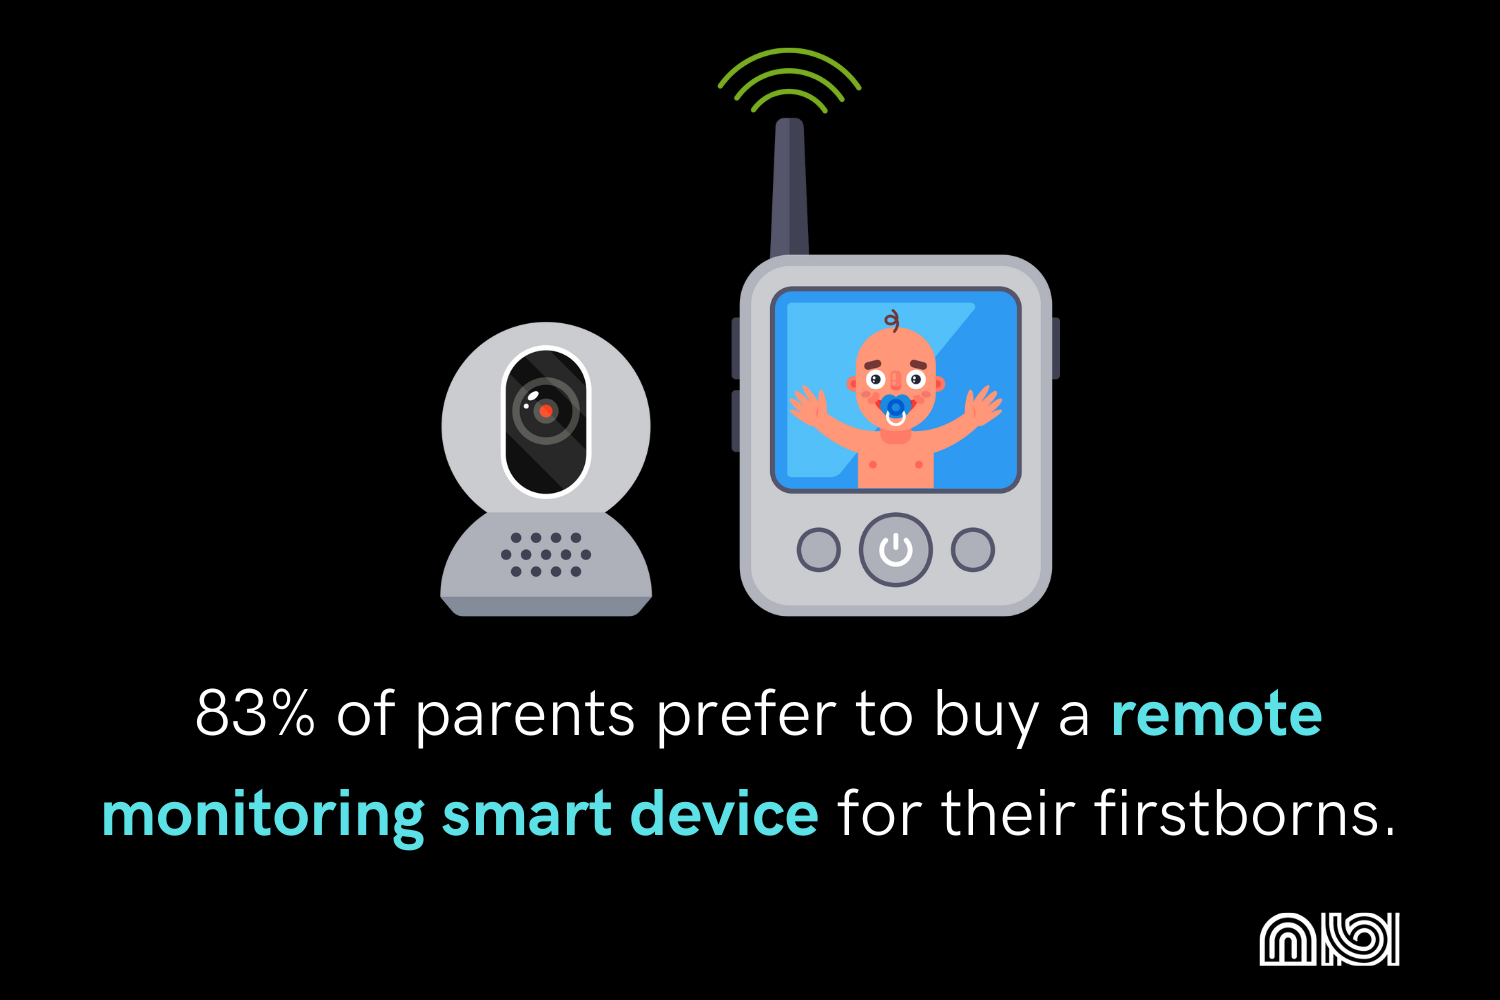 Image showing 83% of parents choosing remote monitoring smart devices for firstborns.